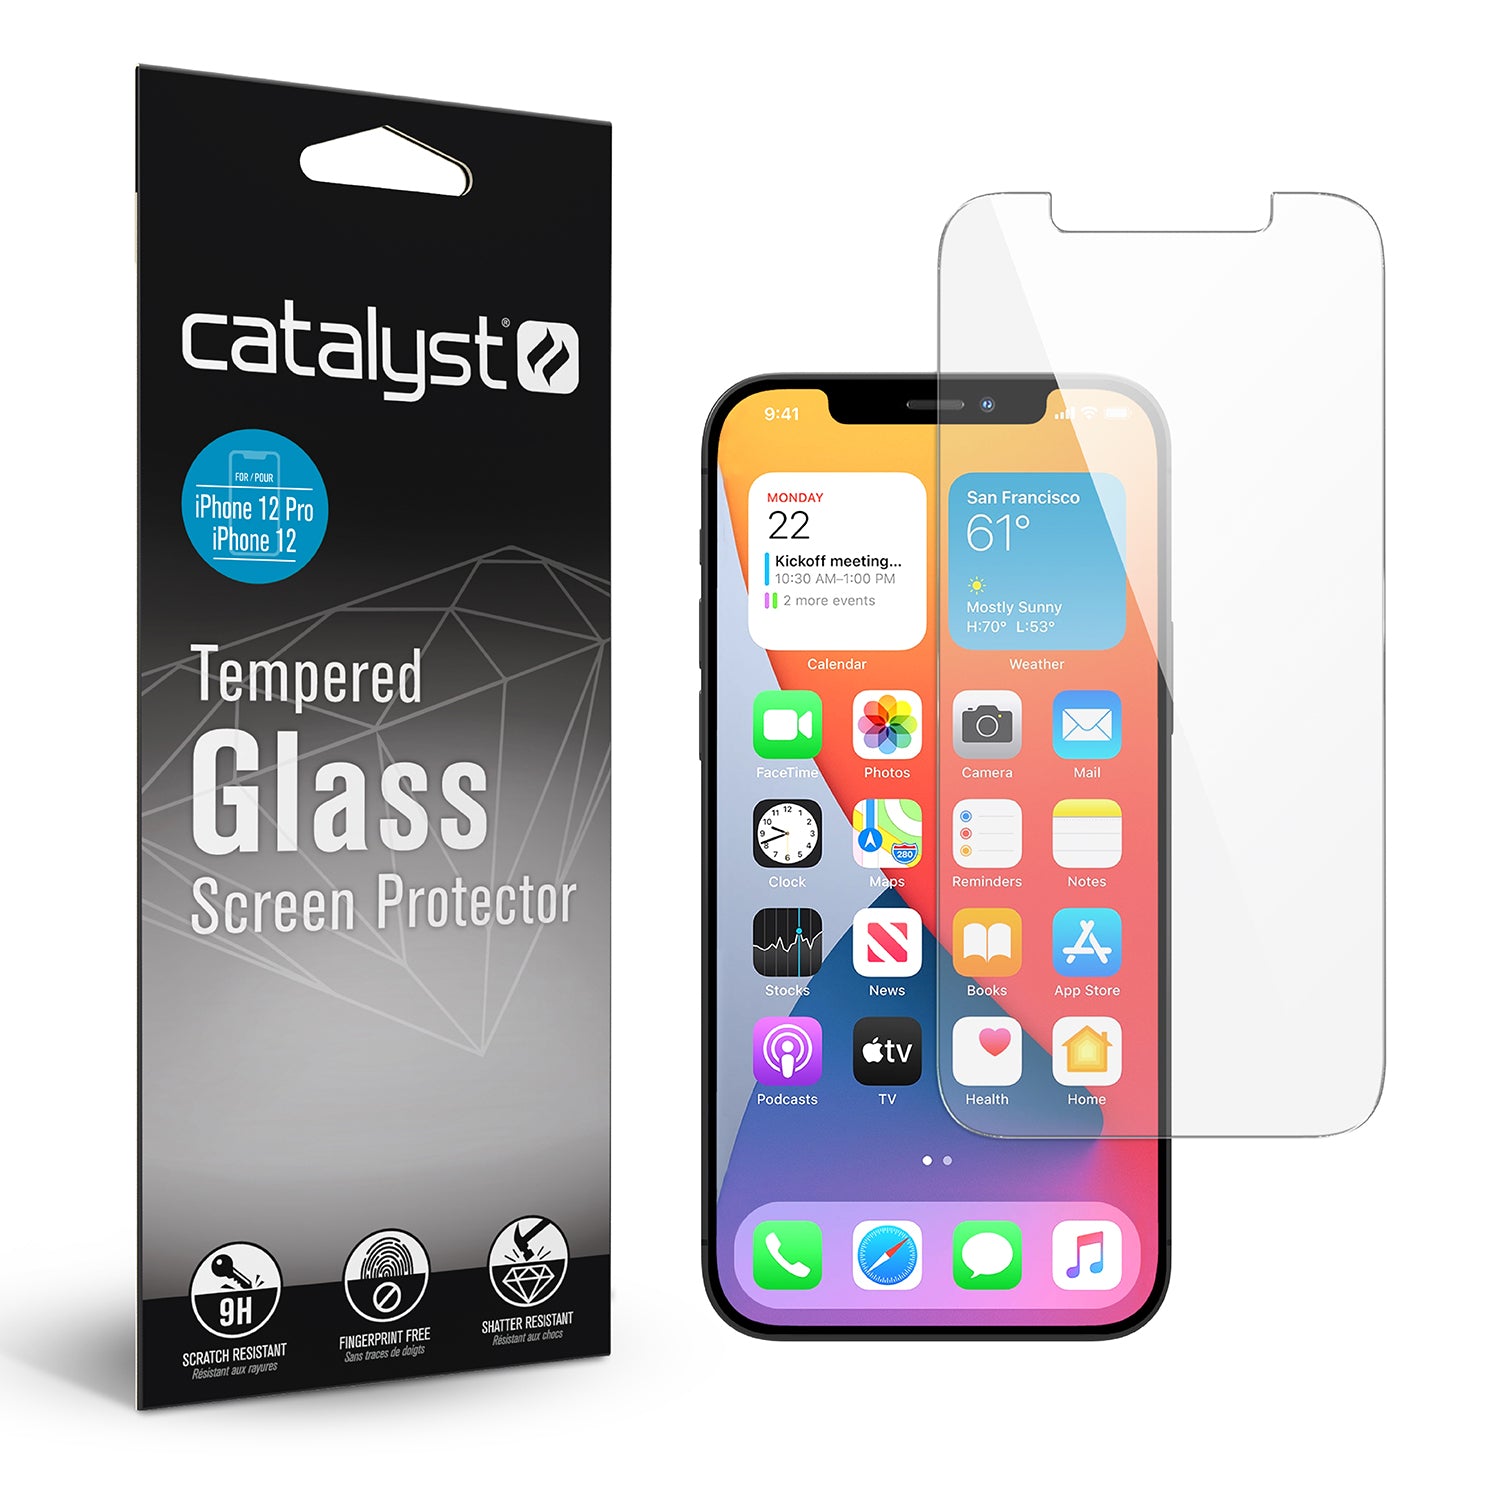 Catalyst Tempered Glass Screen Protector for iPhone 12 and iPhone 12pro with packaging and tempered glass screen protector and iPhone.